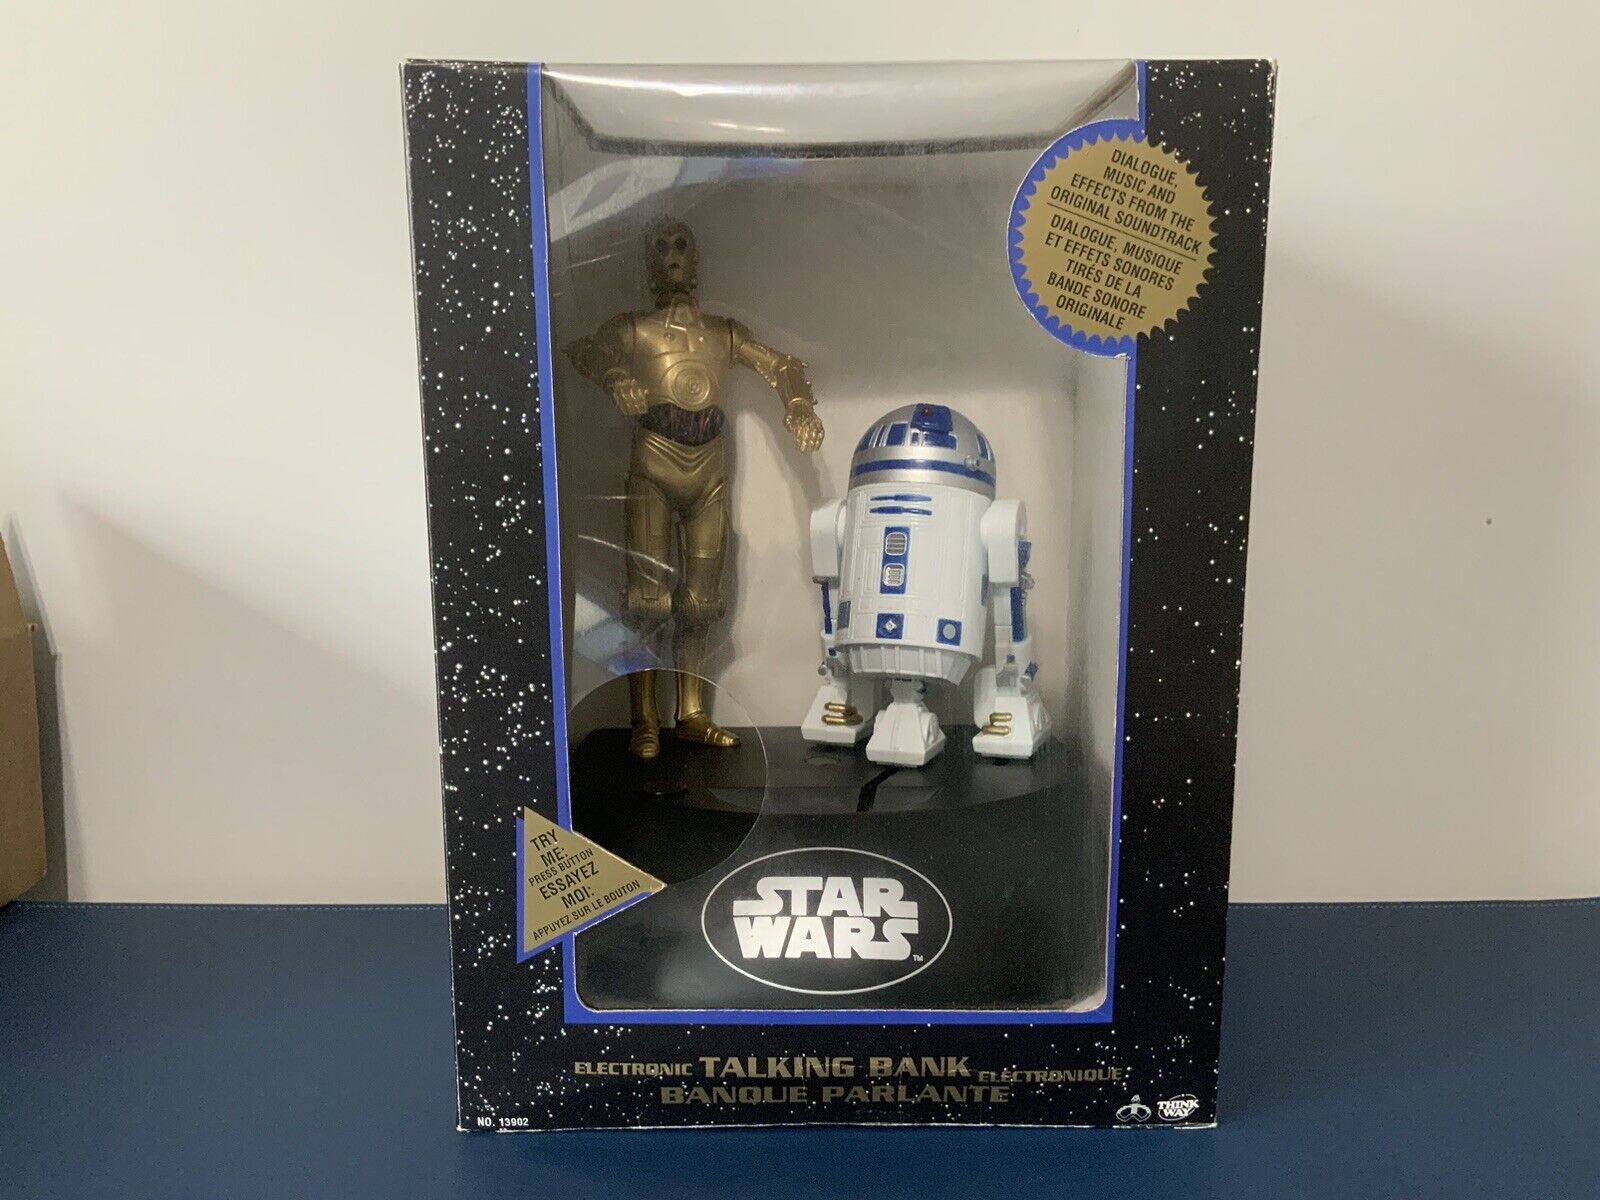 RARE French/Canadian Version 1995 Star Wars Electronic Talking Bank C3PO & R2D2